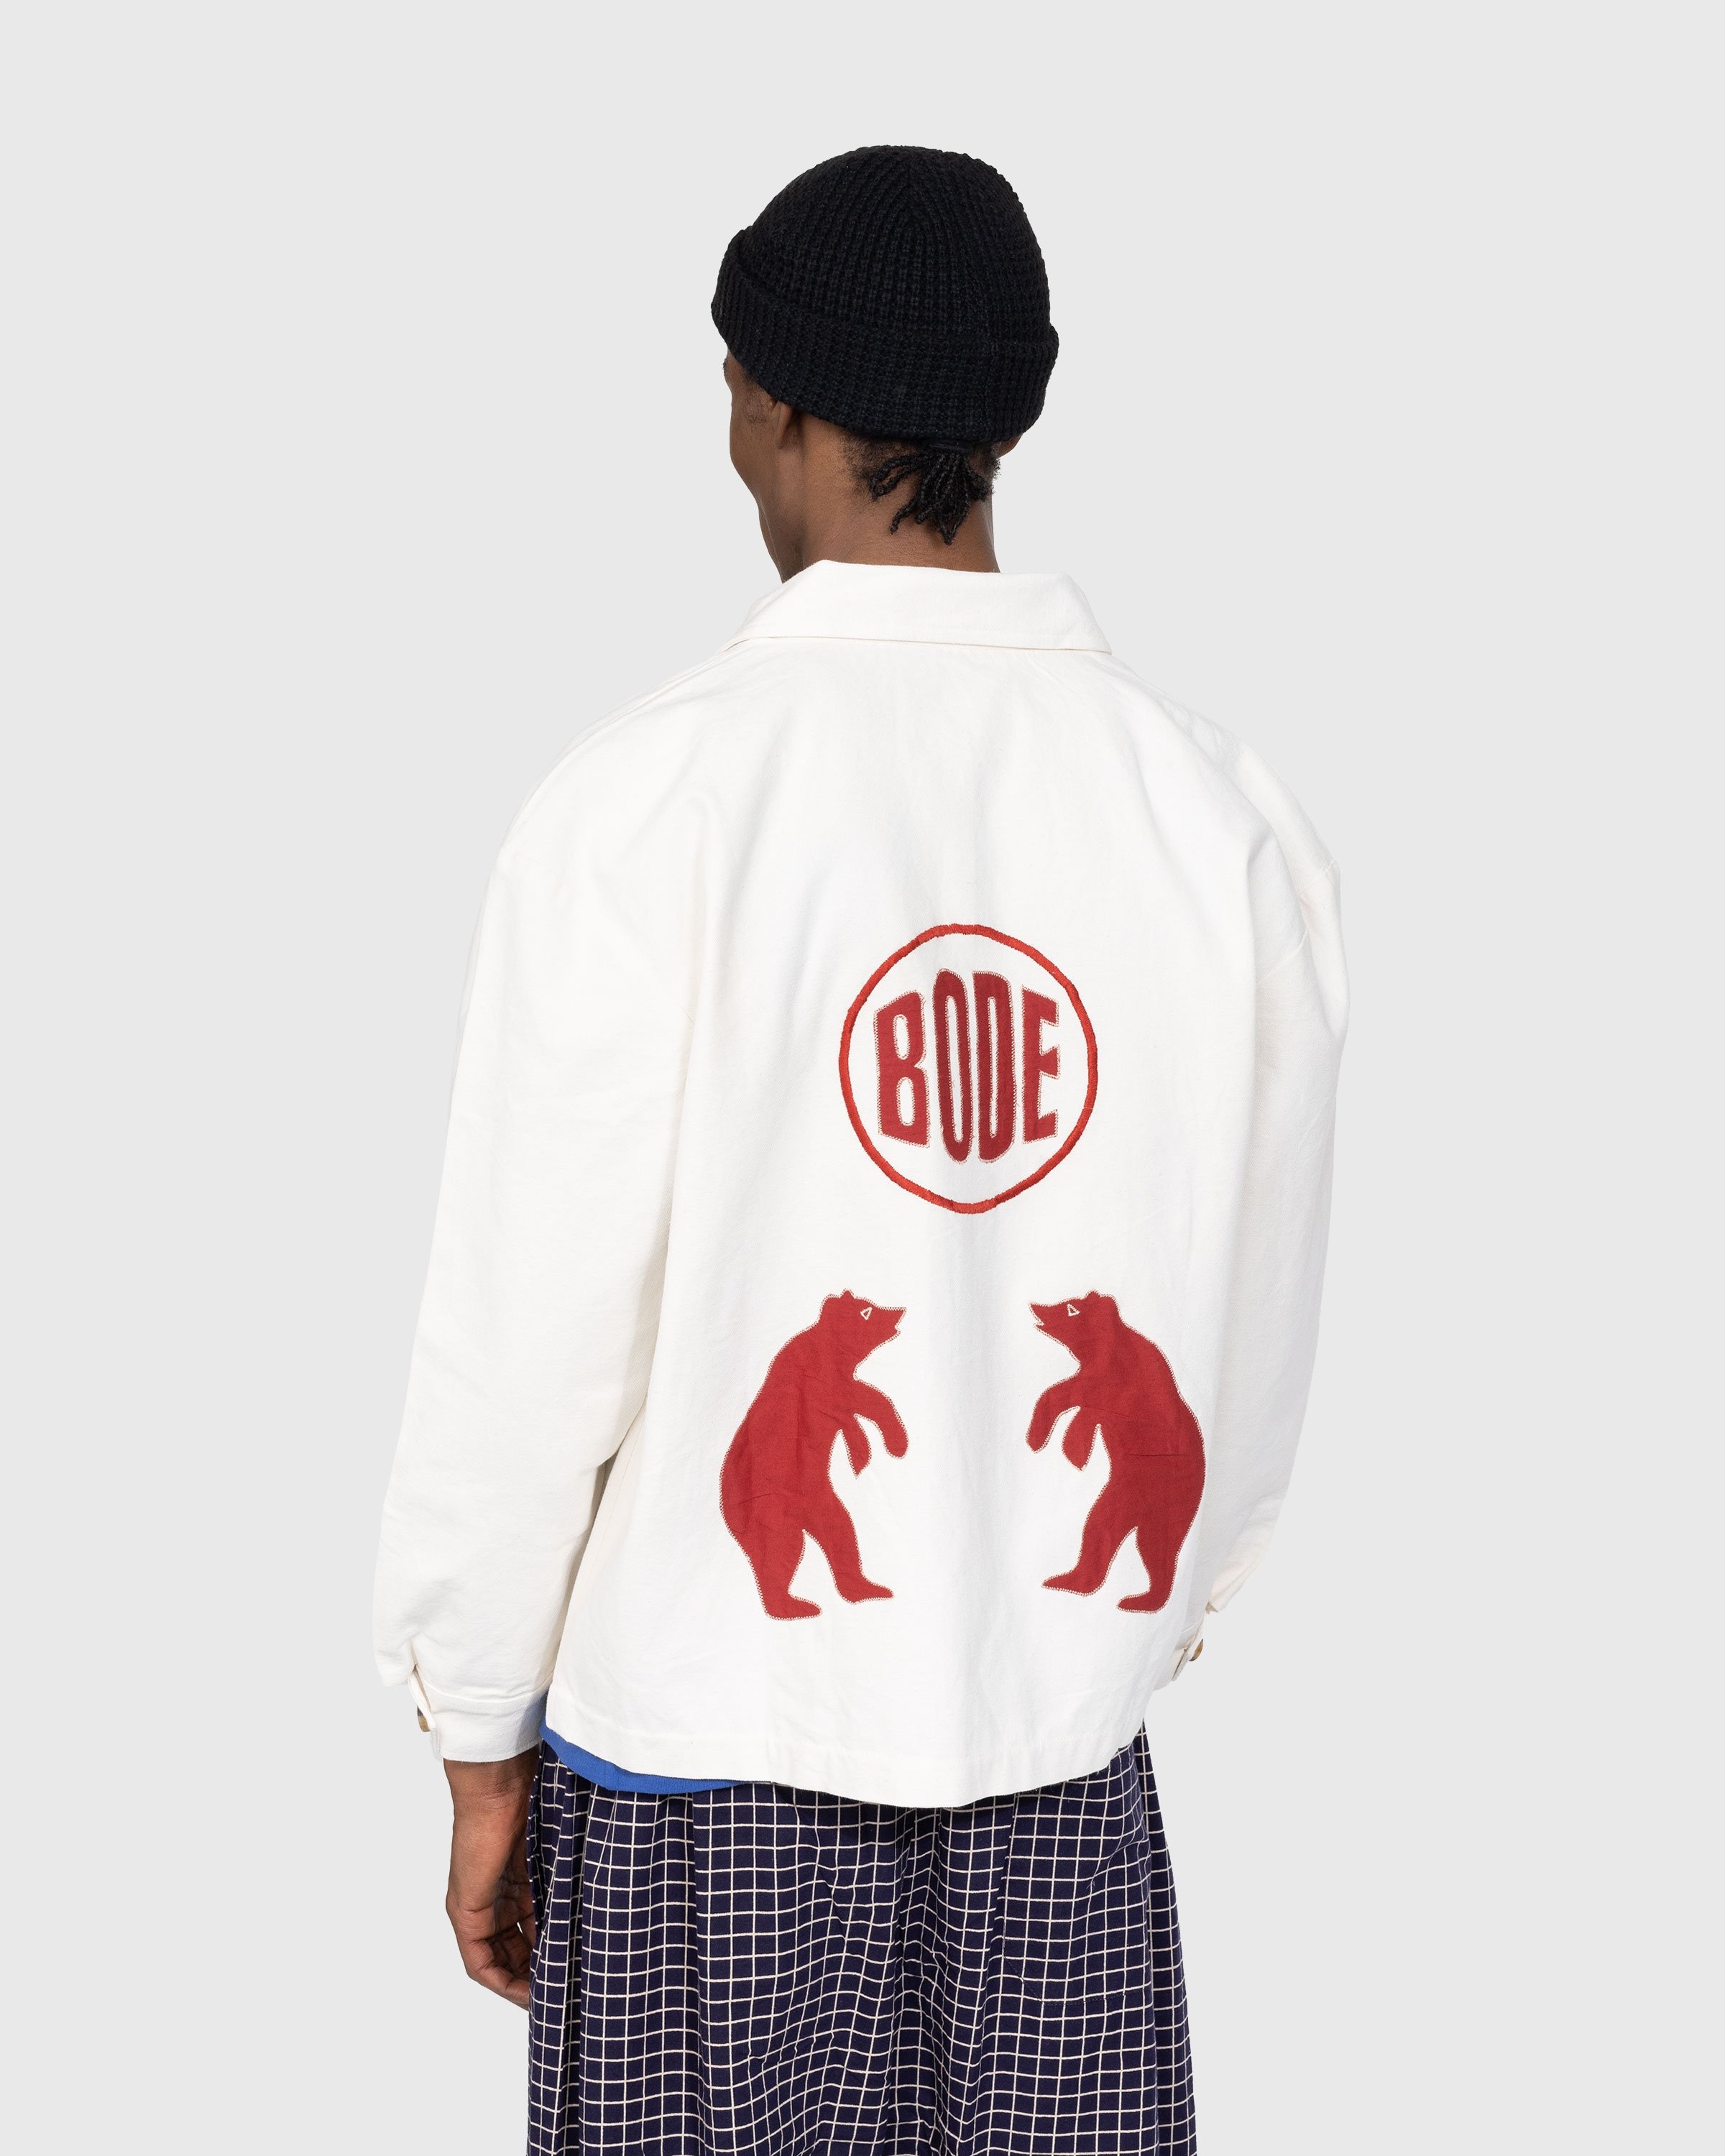 bode – Boar Applique Jacket White/Red - Outerwear - White - Image 5